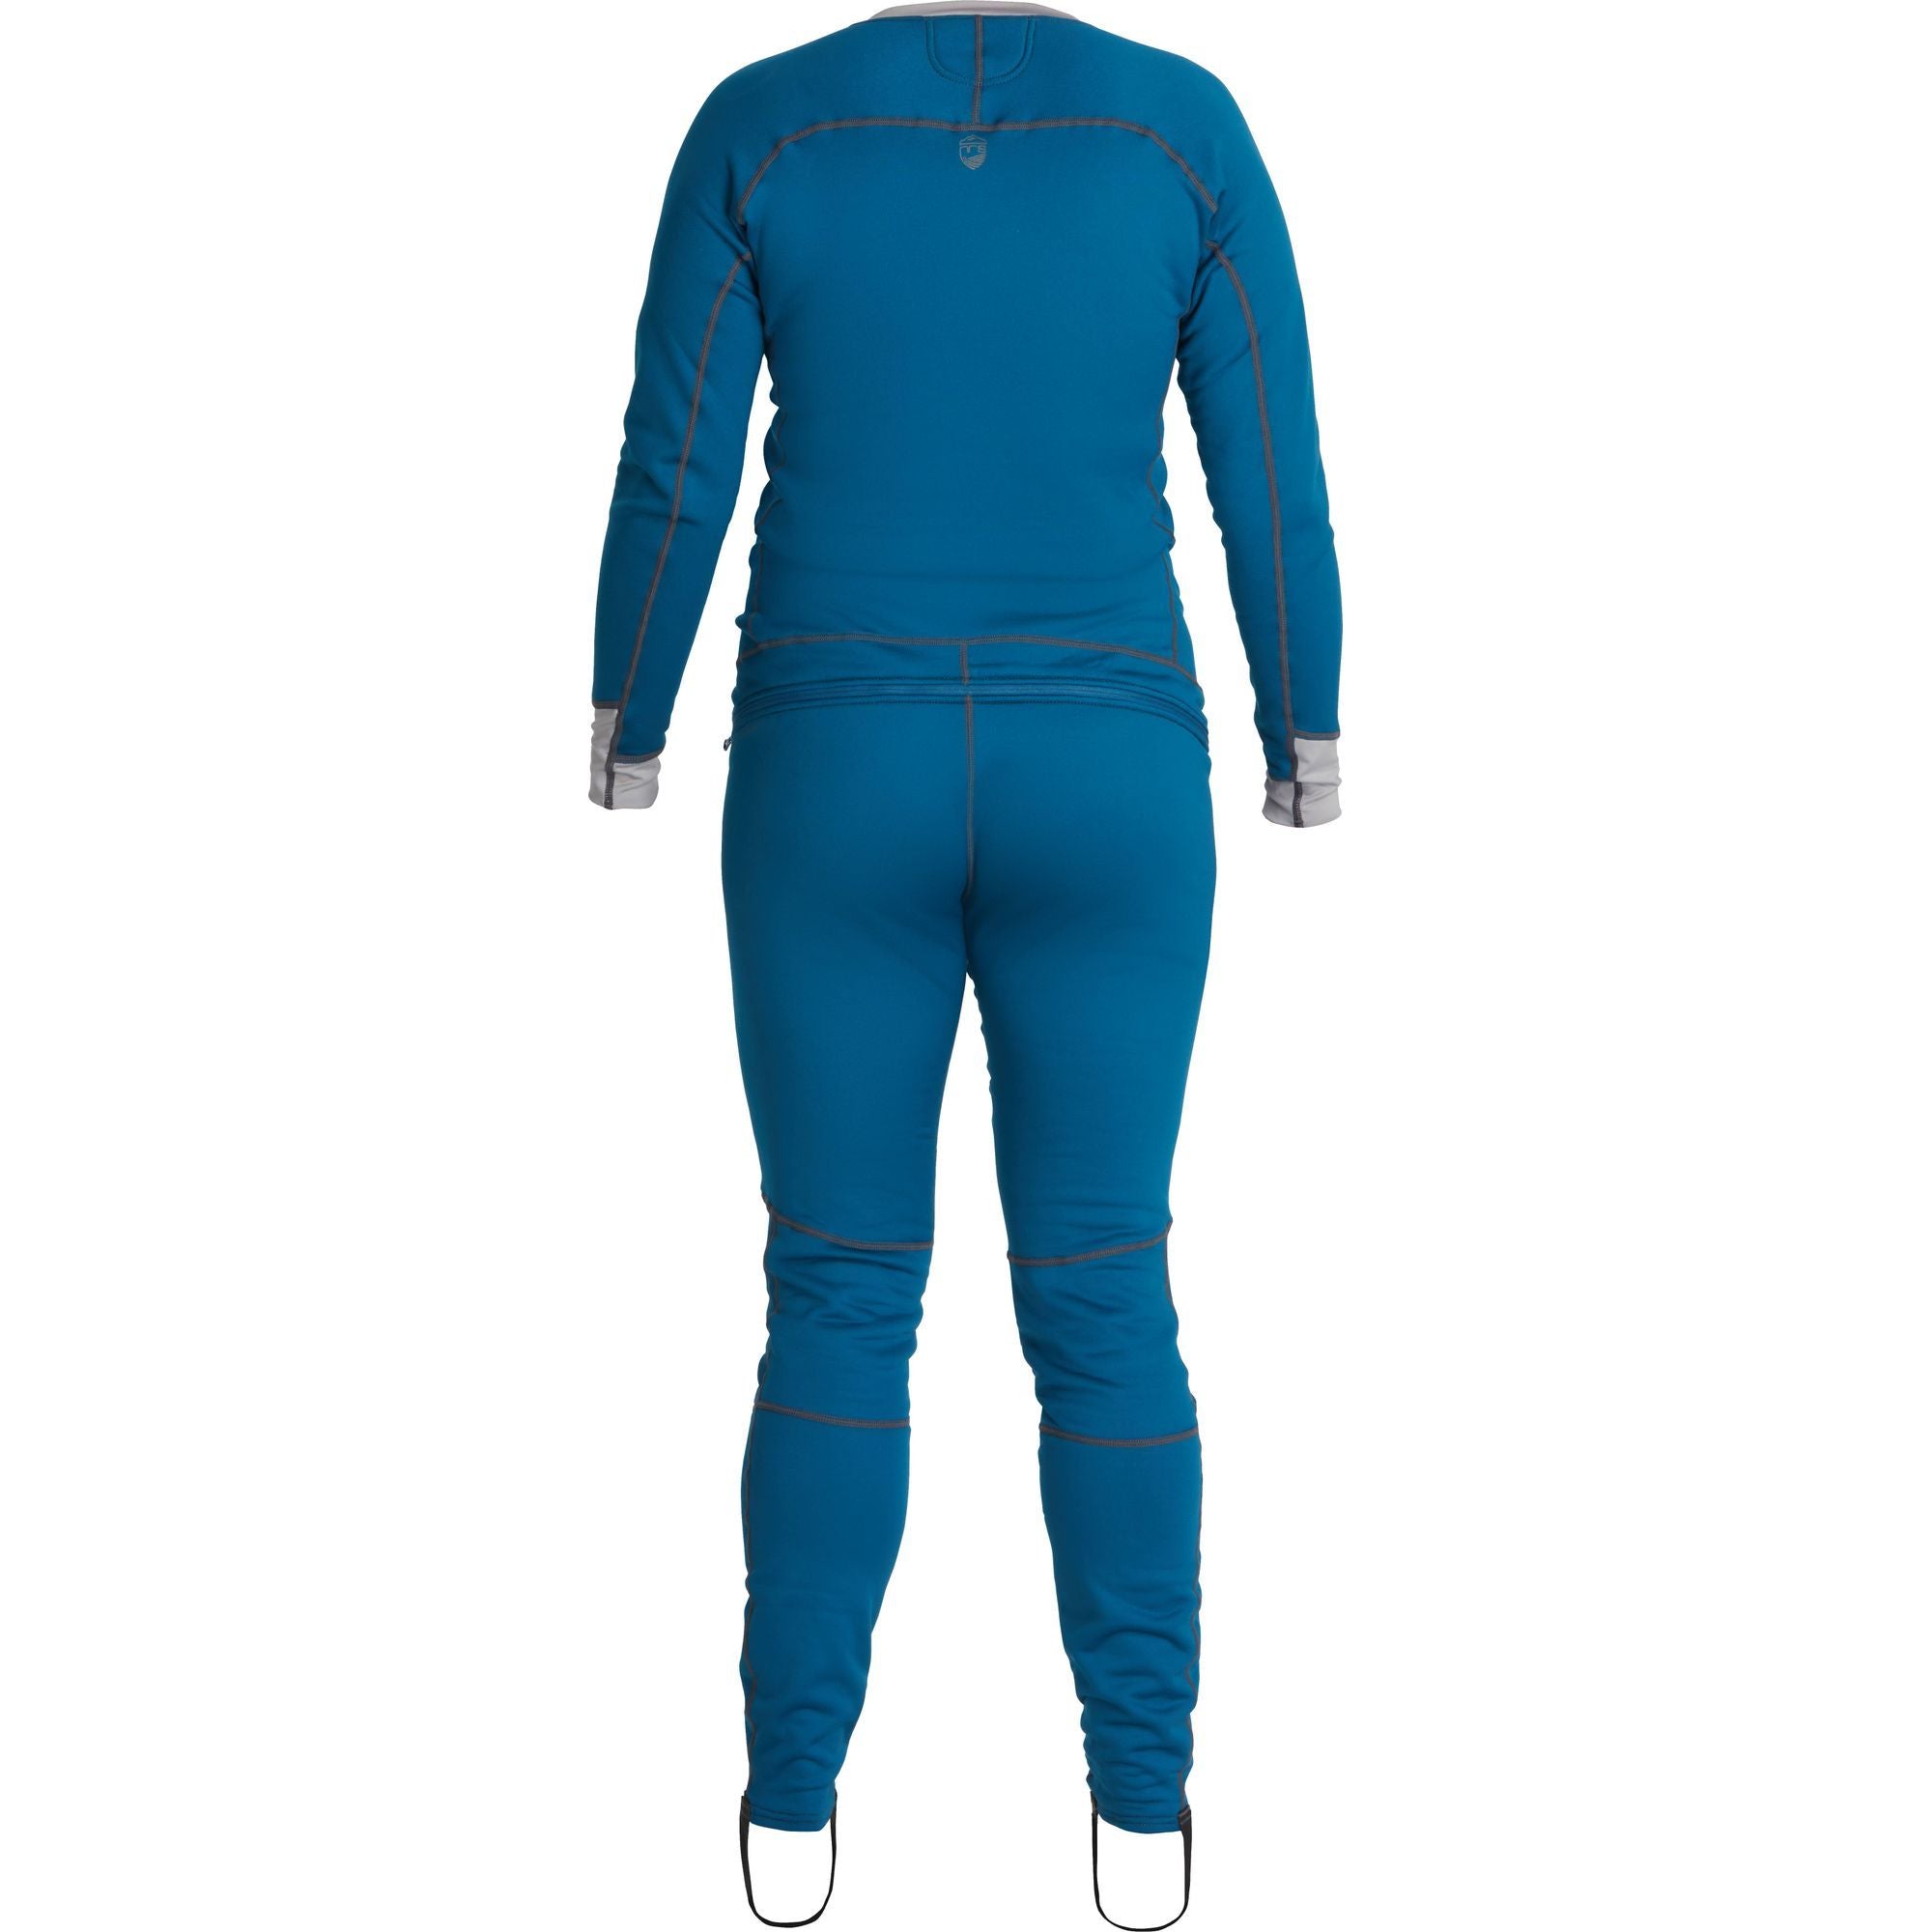 NRS Expedition Weight Union Suit, Women's